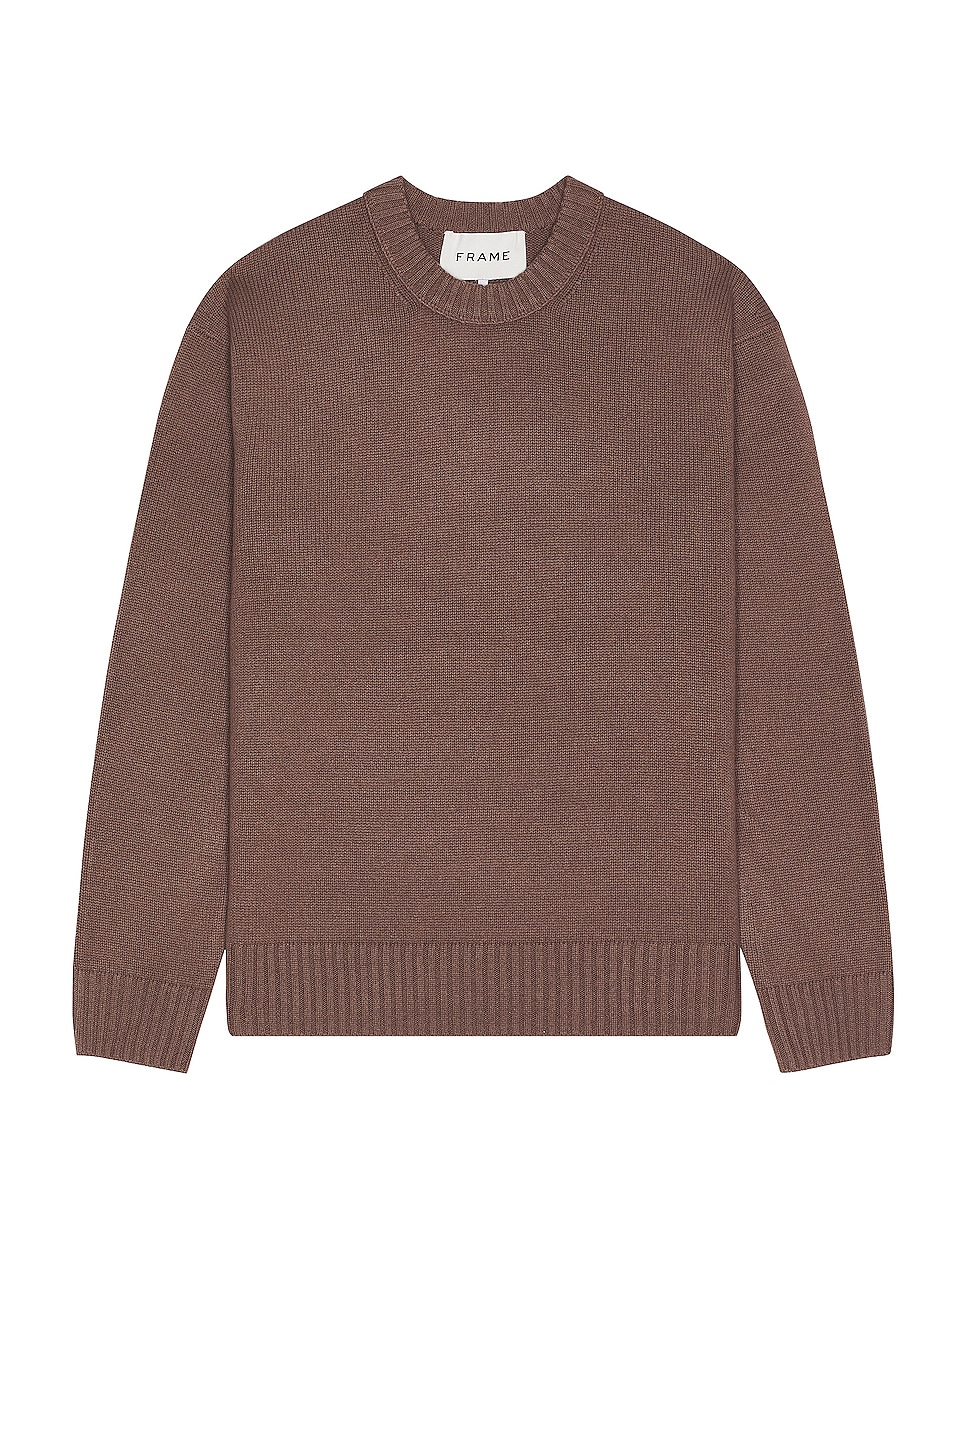 Image 1 of FRAME Cashmere Sweater in Dry Rose